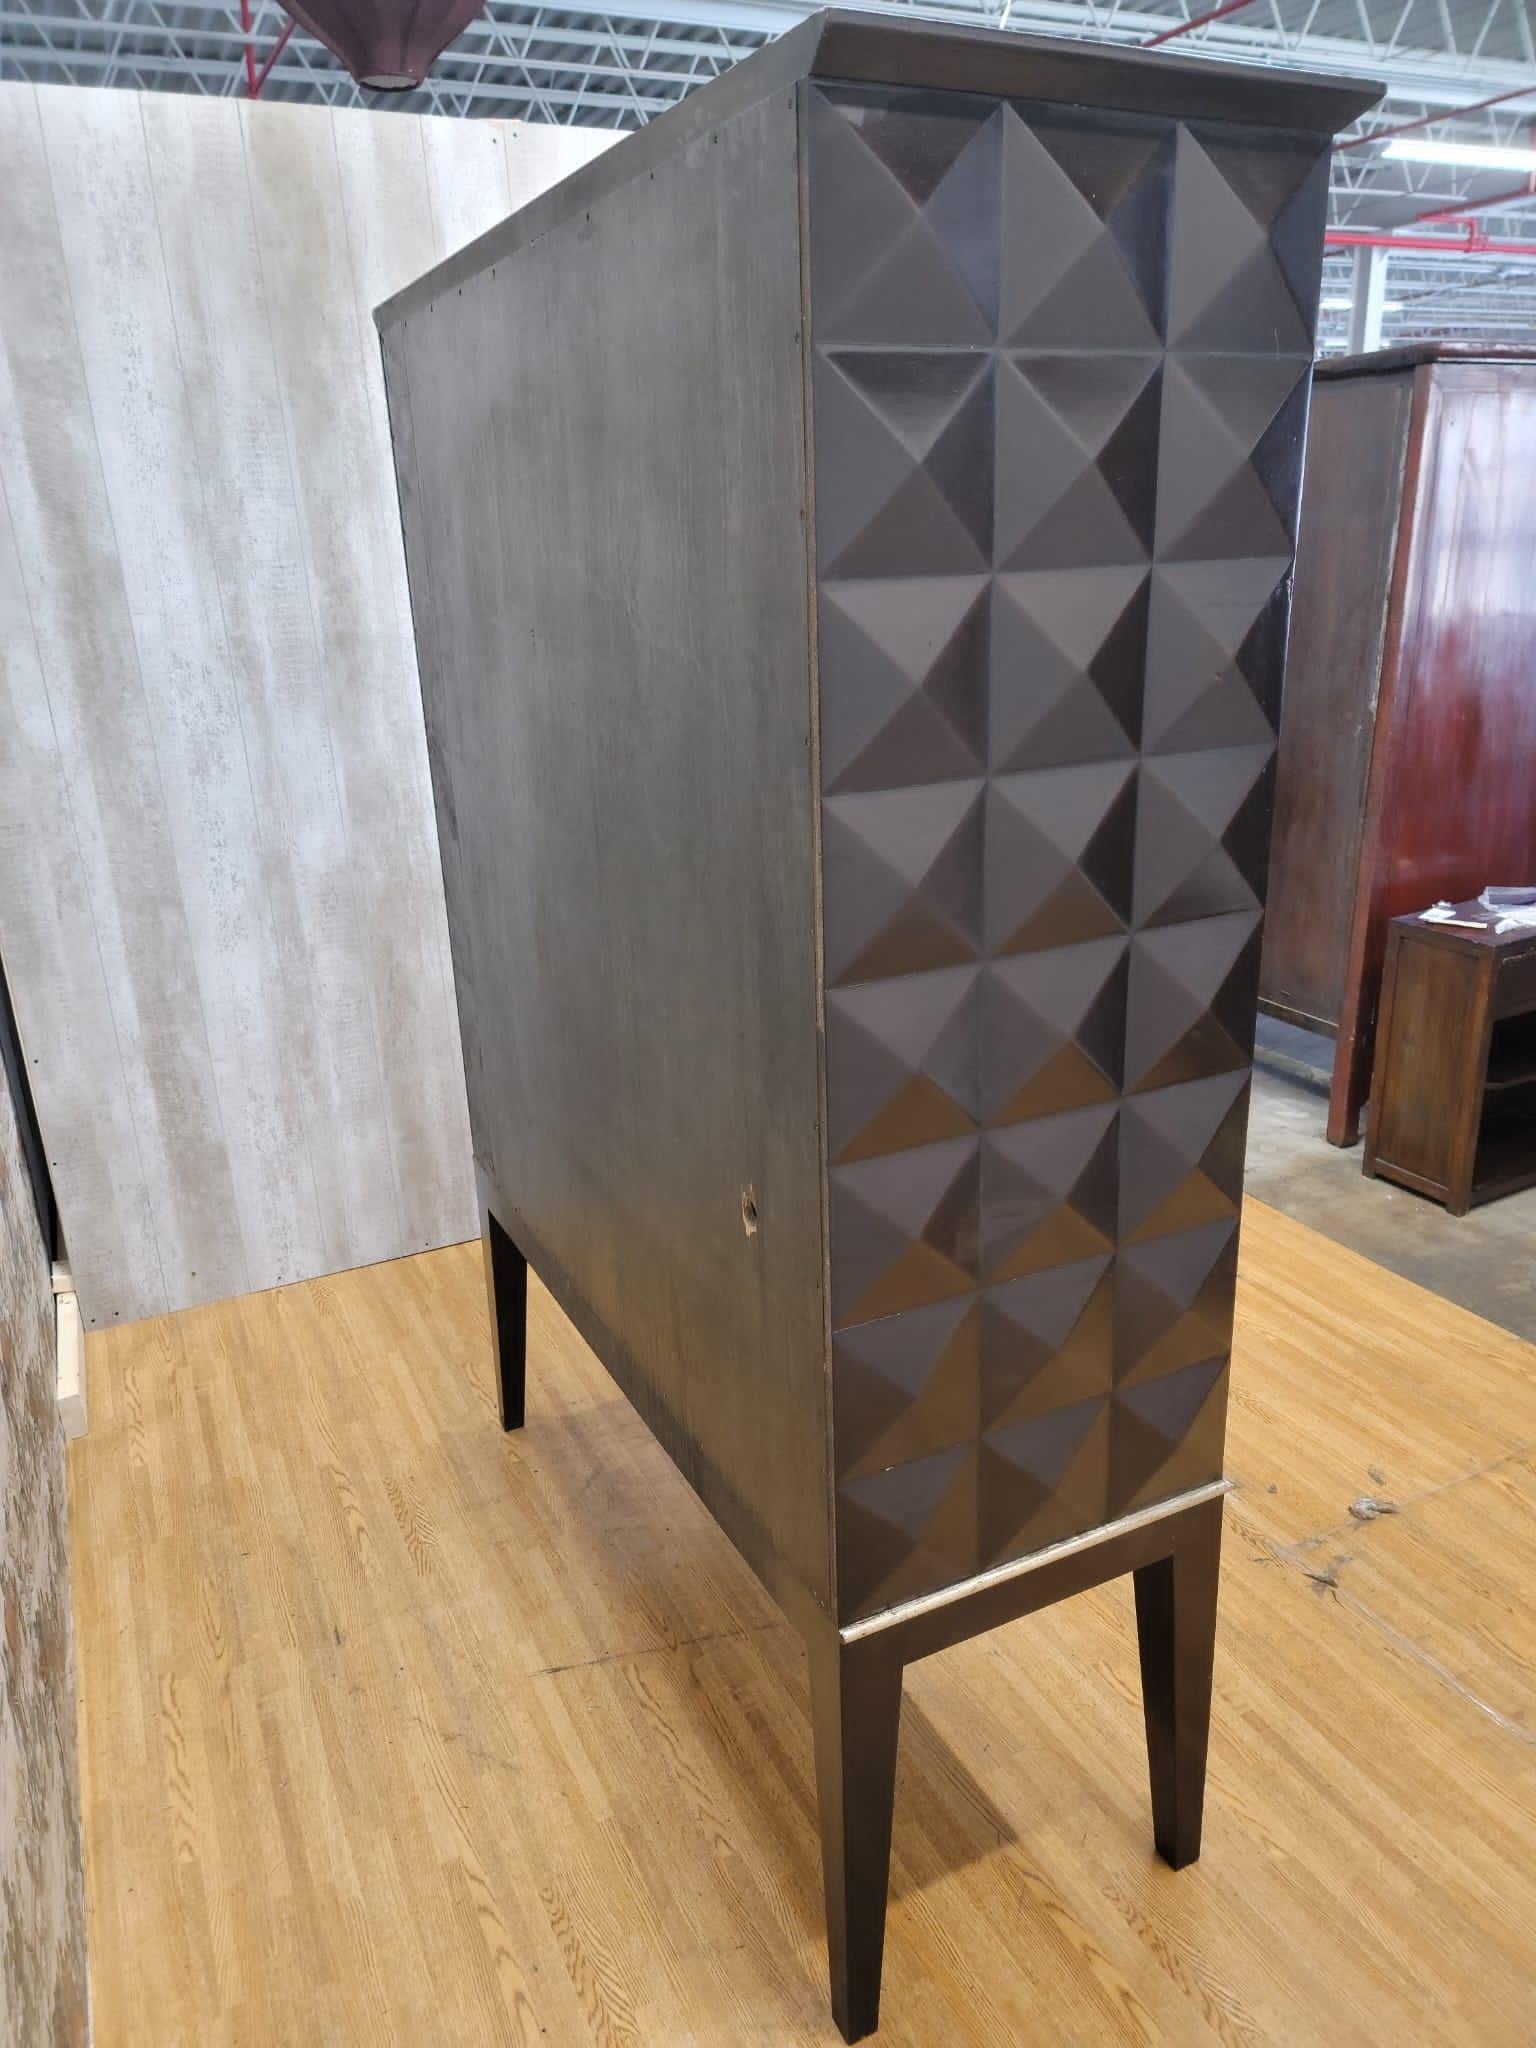 Mid-Century Modern handmade walnut cabinet with geo diamond texture

Shelves are not included with cabinet, but we can custom make them if needed. Contact us for additional info. 

Made in the USA

Circa: 1990s

Dimensions:

W 54.5